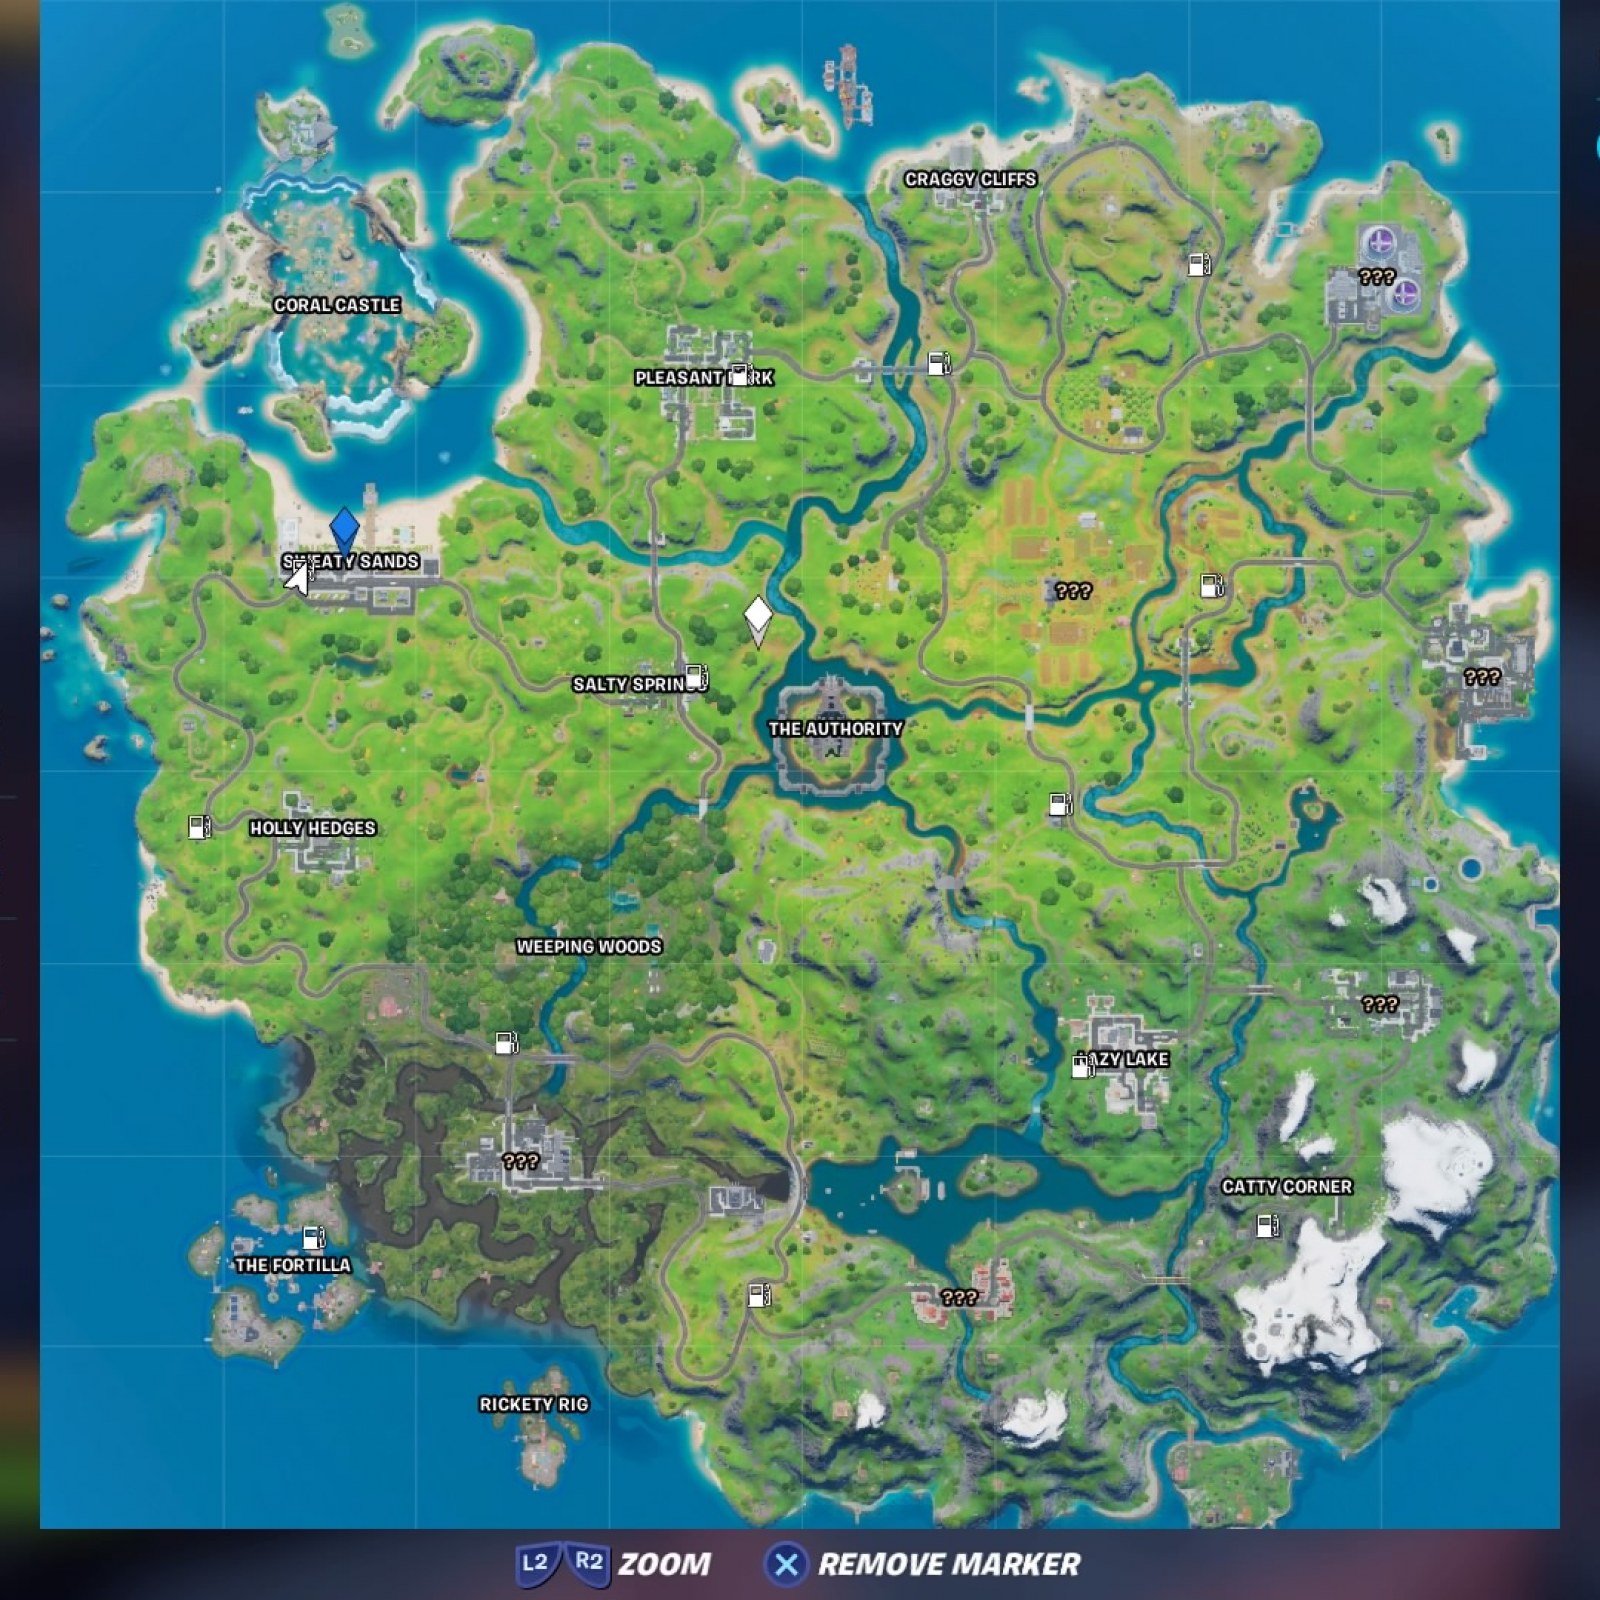 Gas Station Fortnite Map Location Fortnite Cars Guide Locations How To Gas Up Where To Find Gas Cans